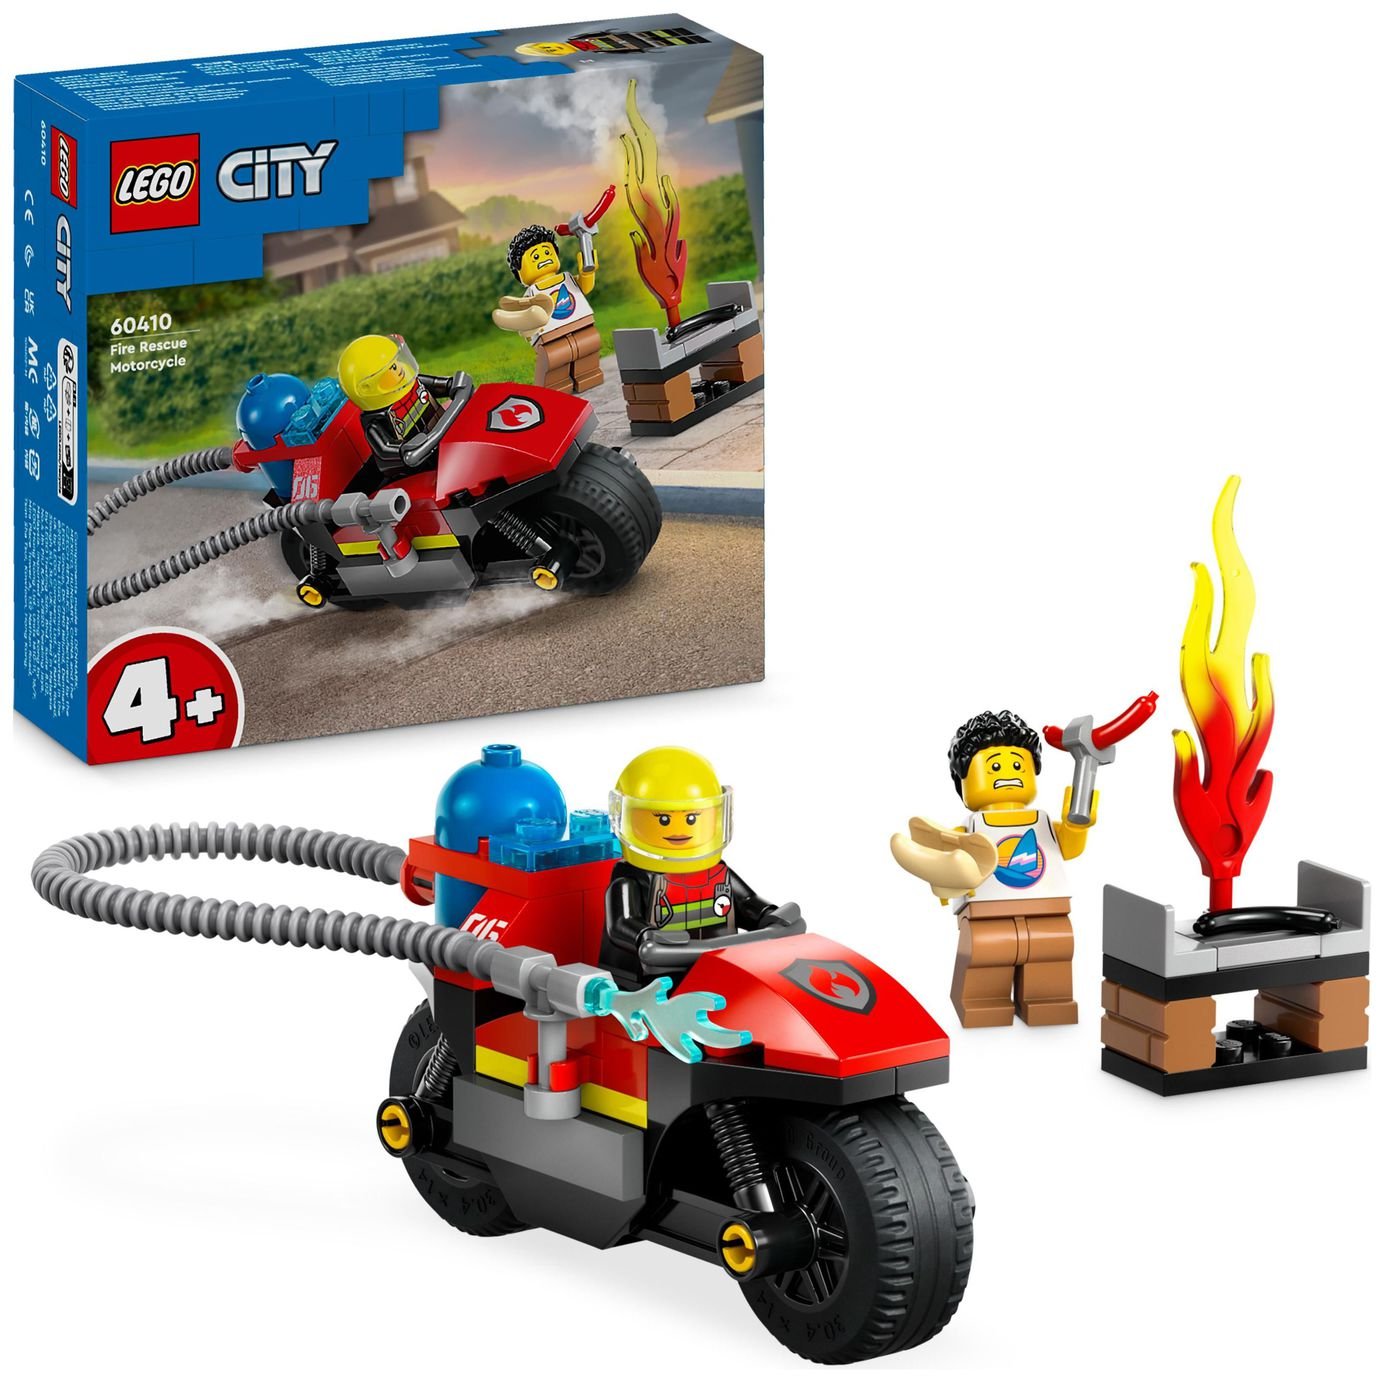 LEGO City Fire Rescue Motorcycle 4  Motorbike Toy 60410